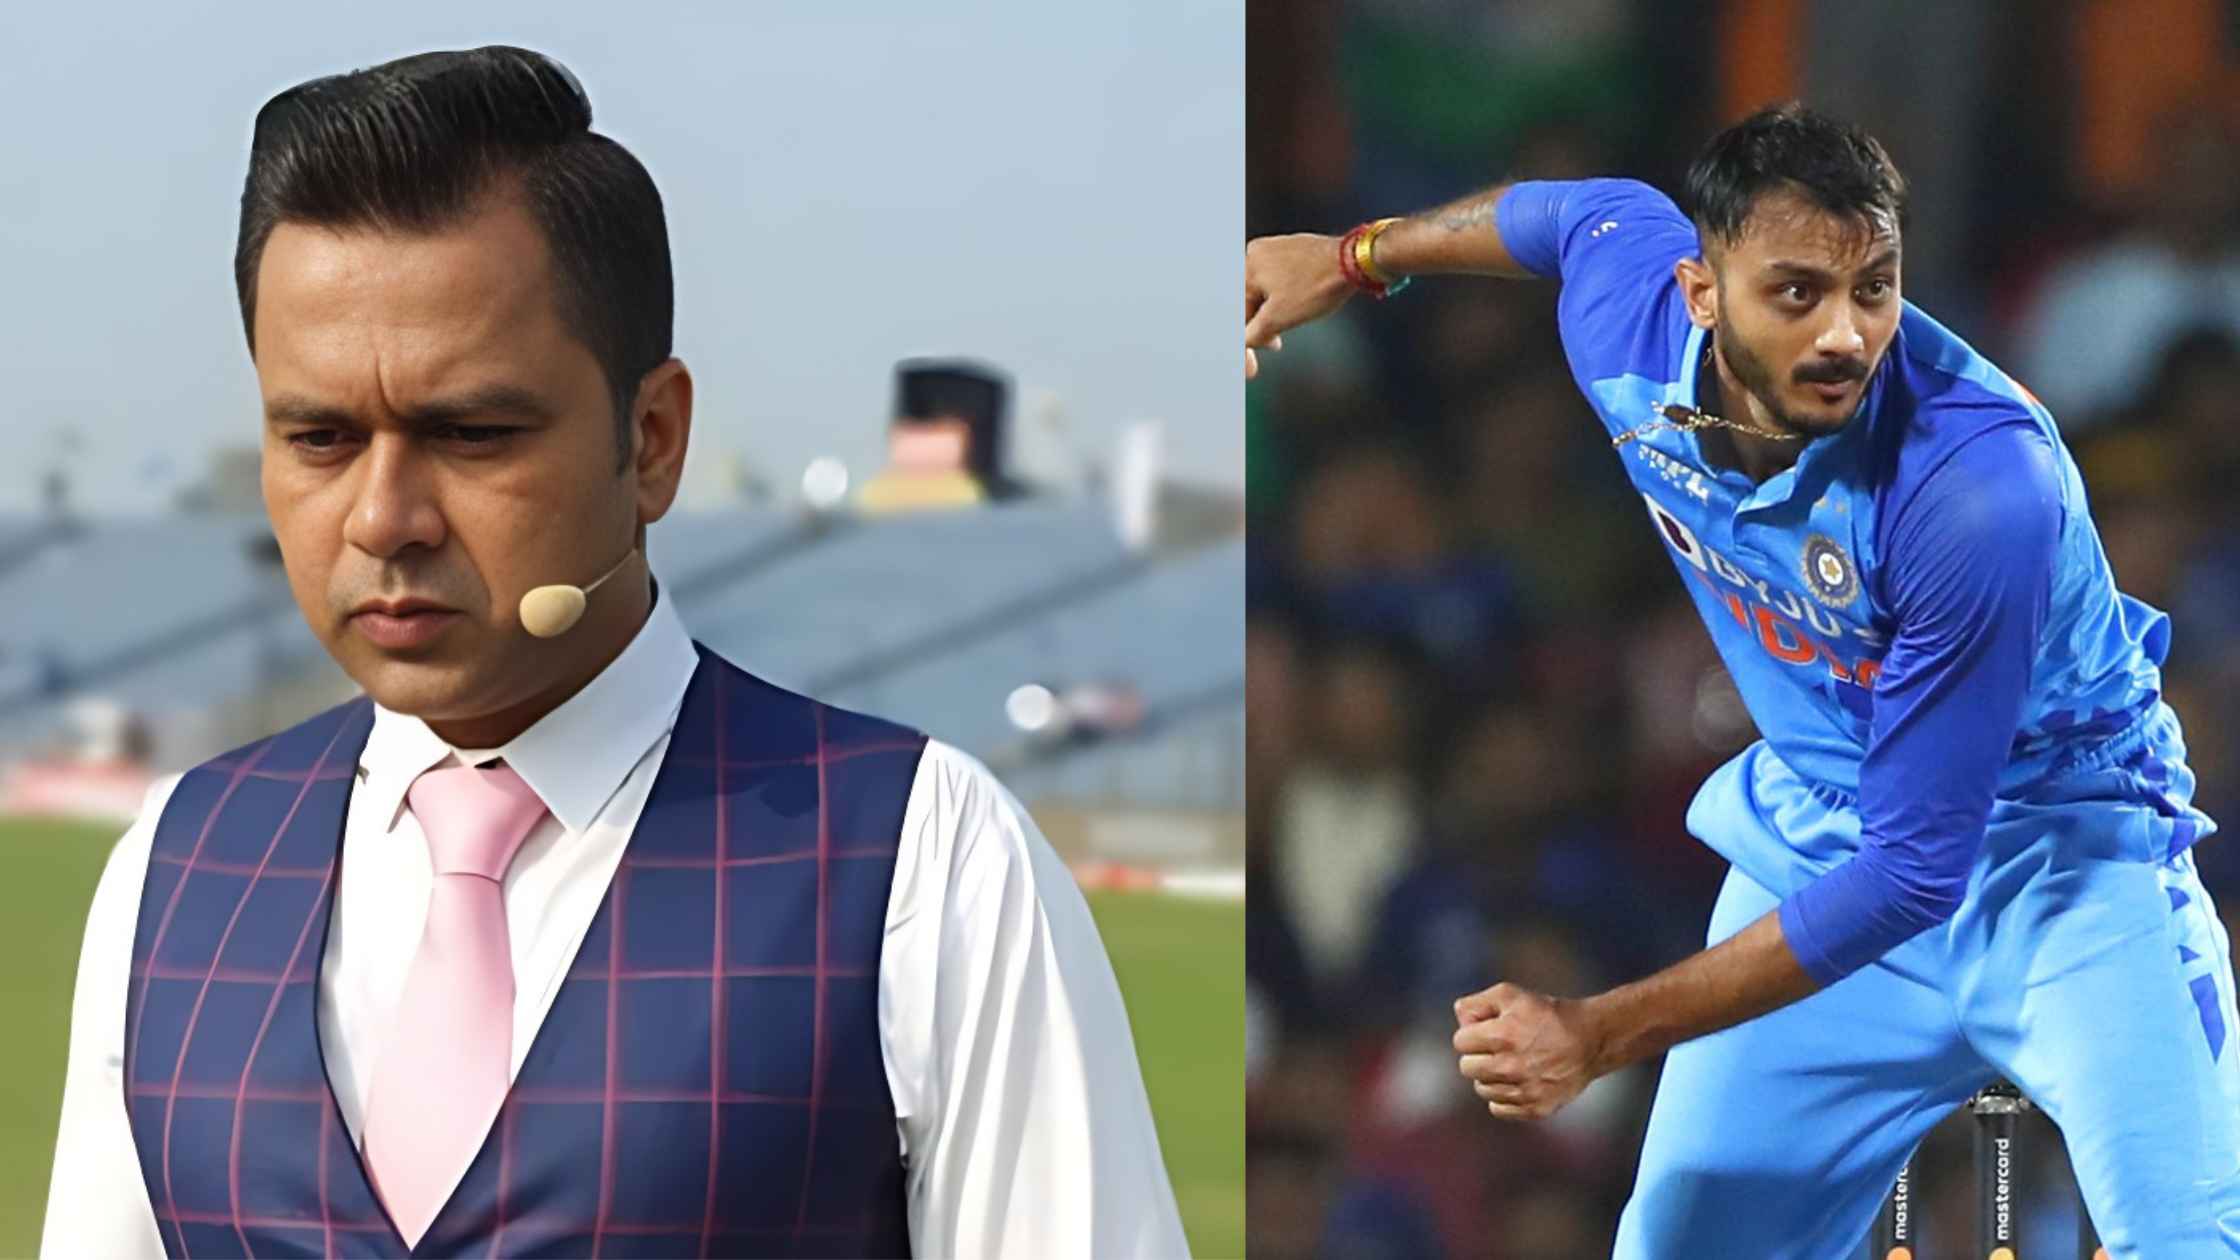 “Indian Team Will Miss Axar Patel… India’s selection has also been doubtful” says Aakash Chopra